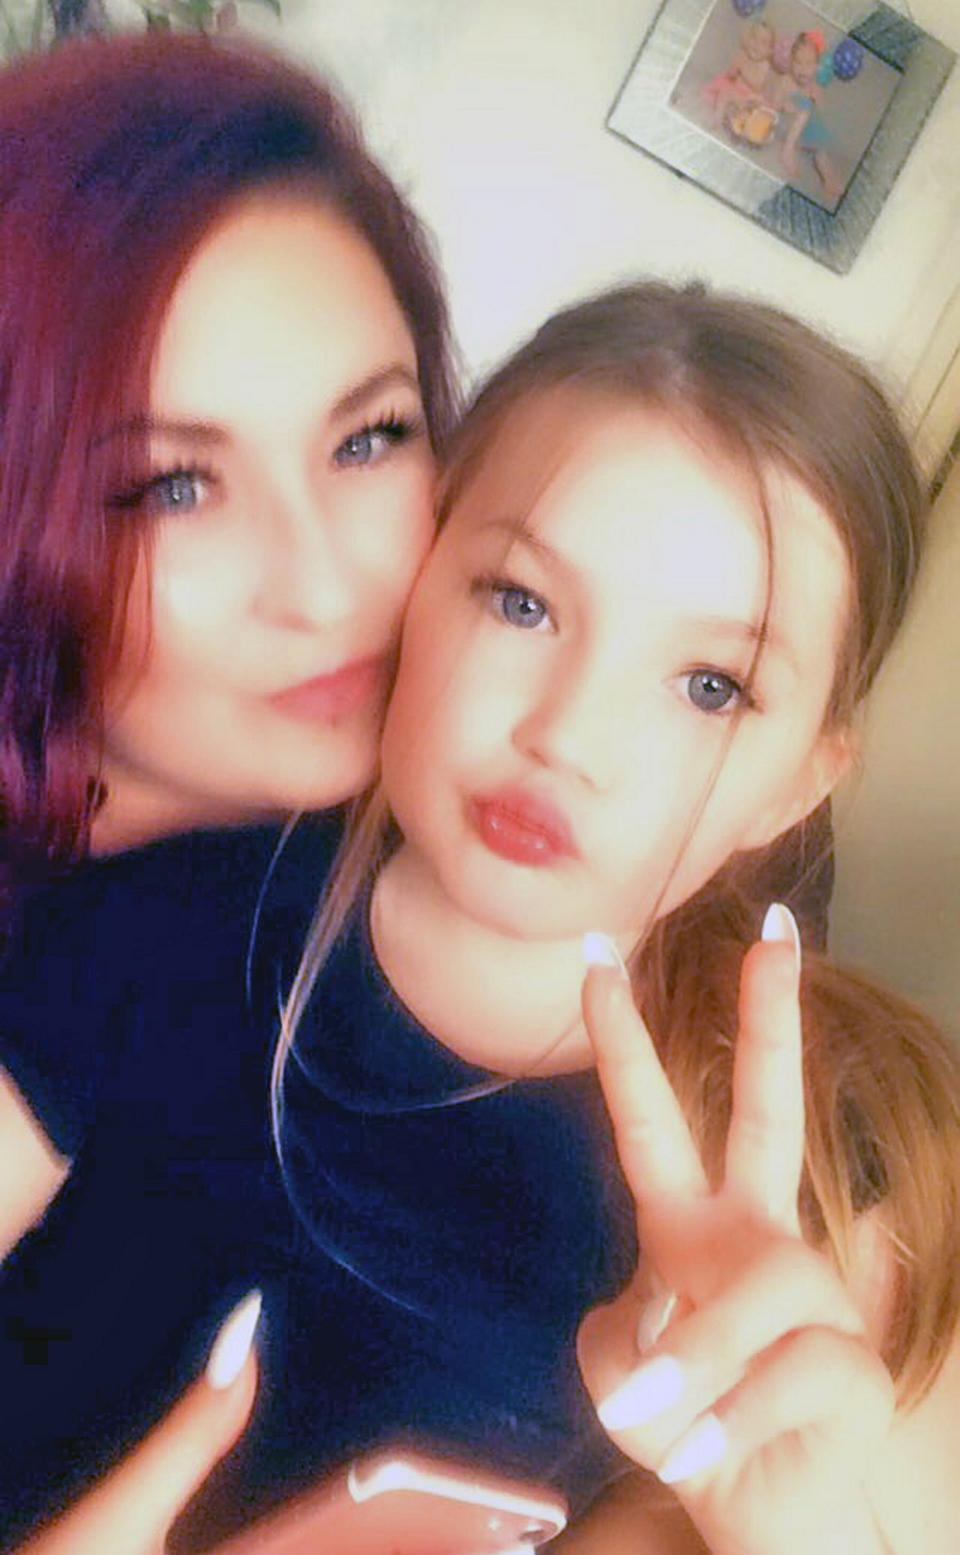 Pictured: Kayleigh McColl with her daughter Elliemai Smith.

An eight year old girl suffered concussion and a broken leg when a hit-and-run e-scooter rider ploughed into her on a footpath at 'over 20mph'.  Elliemai Smith was sent flying as the scooter smashed into her before the man riding it sped off, leaving her crying on the ground.

She was then rushed to hospital in an ambulance.  Police are now hunting the illegal rider and Elliemai's mother, 28 year old Kayleigh McColl, has appealed for anyone who recognises his description to come forward.  SEE OUR COPY FOR DETAILS.

Please byline: Family/Solent News

© Family/Solent News & Photo Agency
UK +44 (0) 2380 458800
 *** Local Caption *** Submitted to us by mum Kayleigh McColl,

07740906872
kayleighlouisepennie@gmail.com